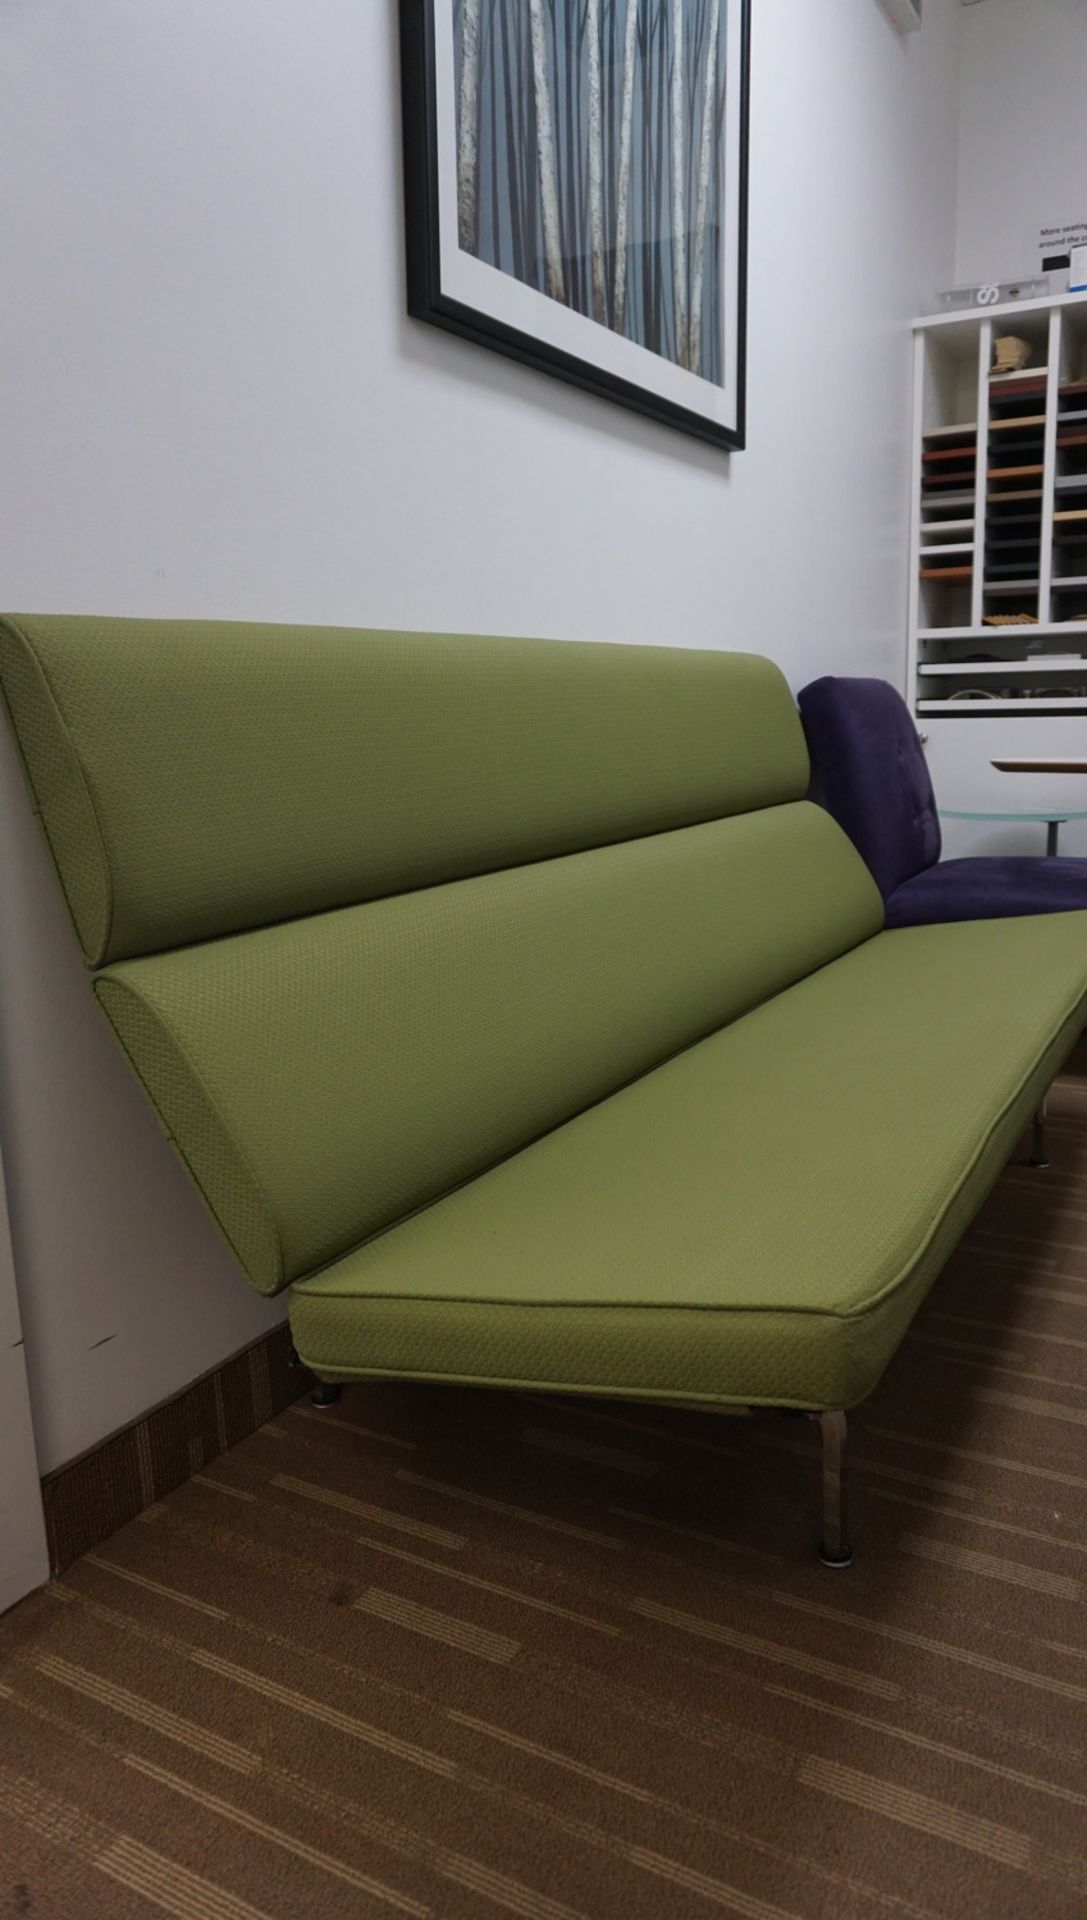 HERMAN MILL EAMES GREEN UPHOLSTERED ARMLESS SOFA ($5,600 MSRP) - Image 2 of 4